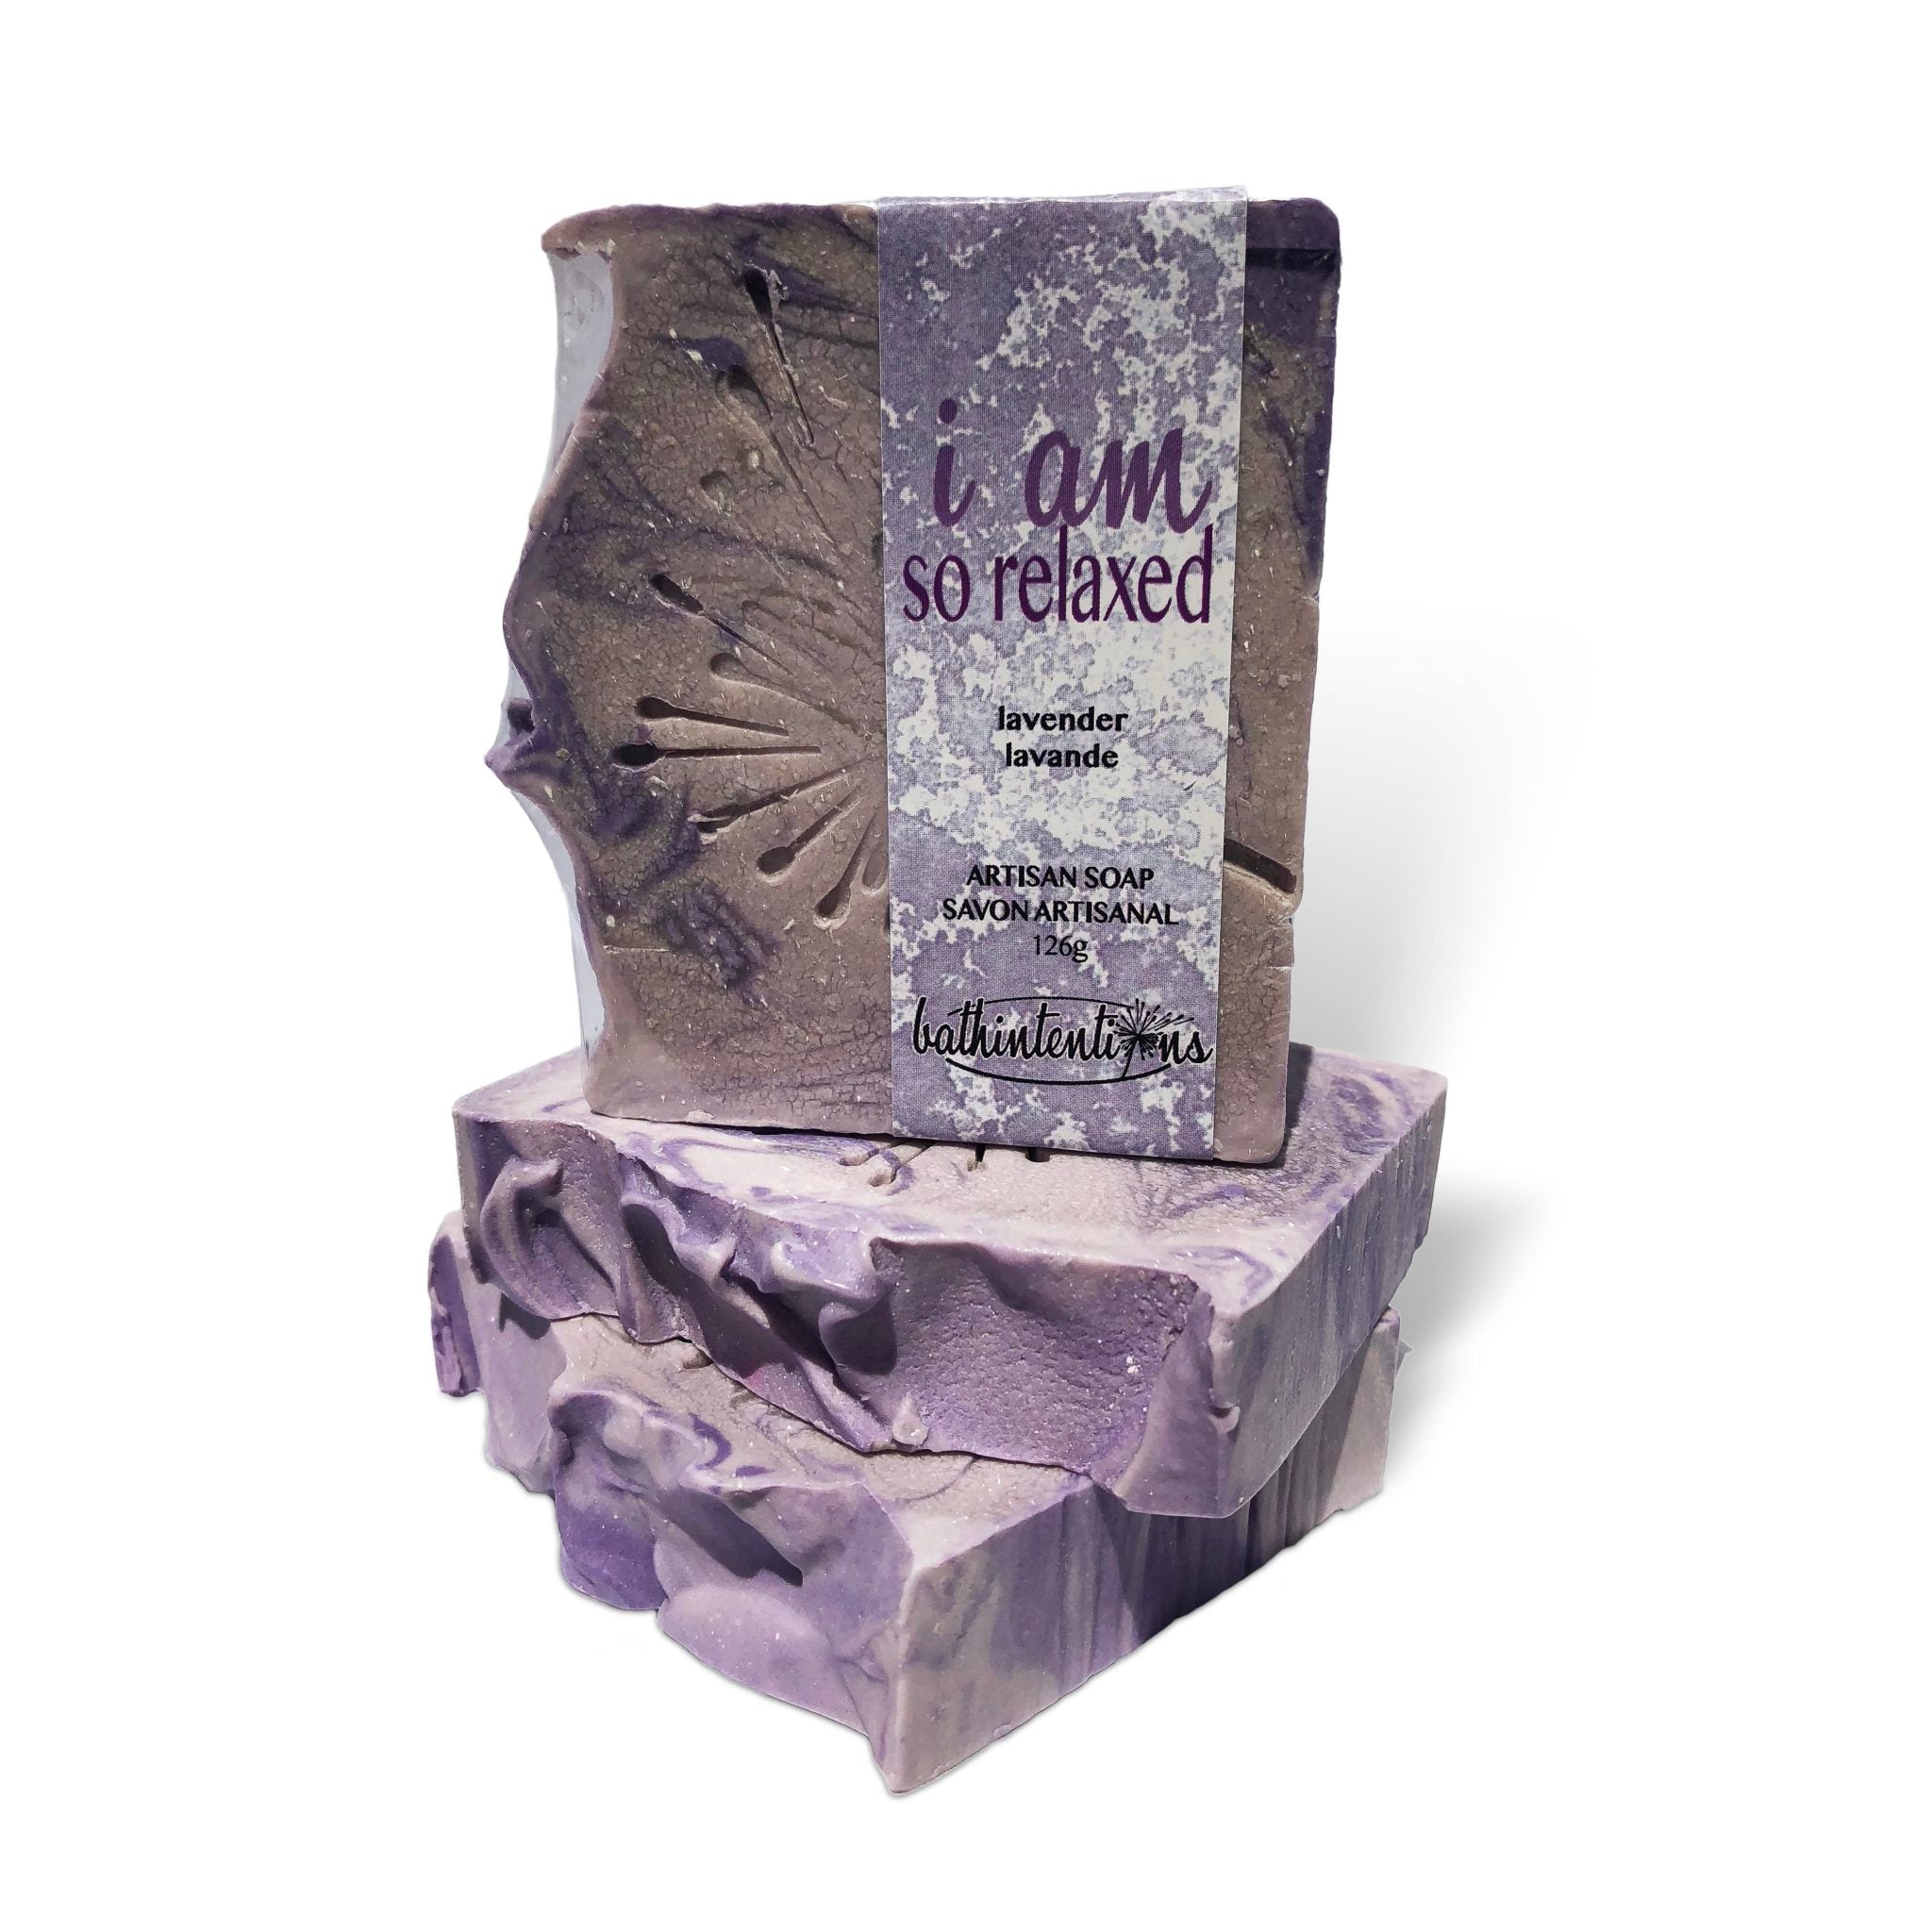 i am so relaxed | artisan soap | lavender